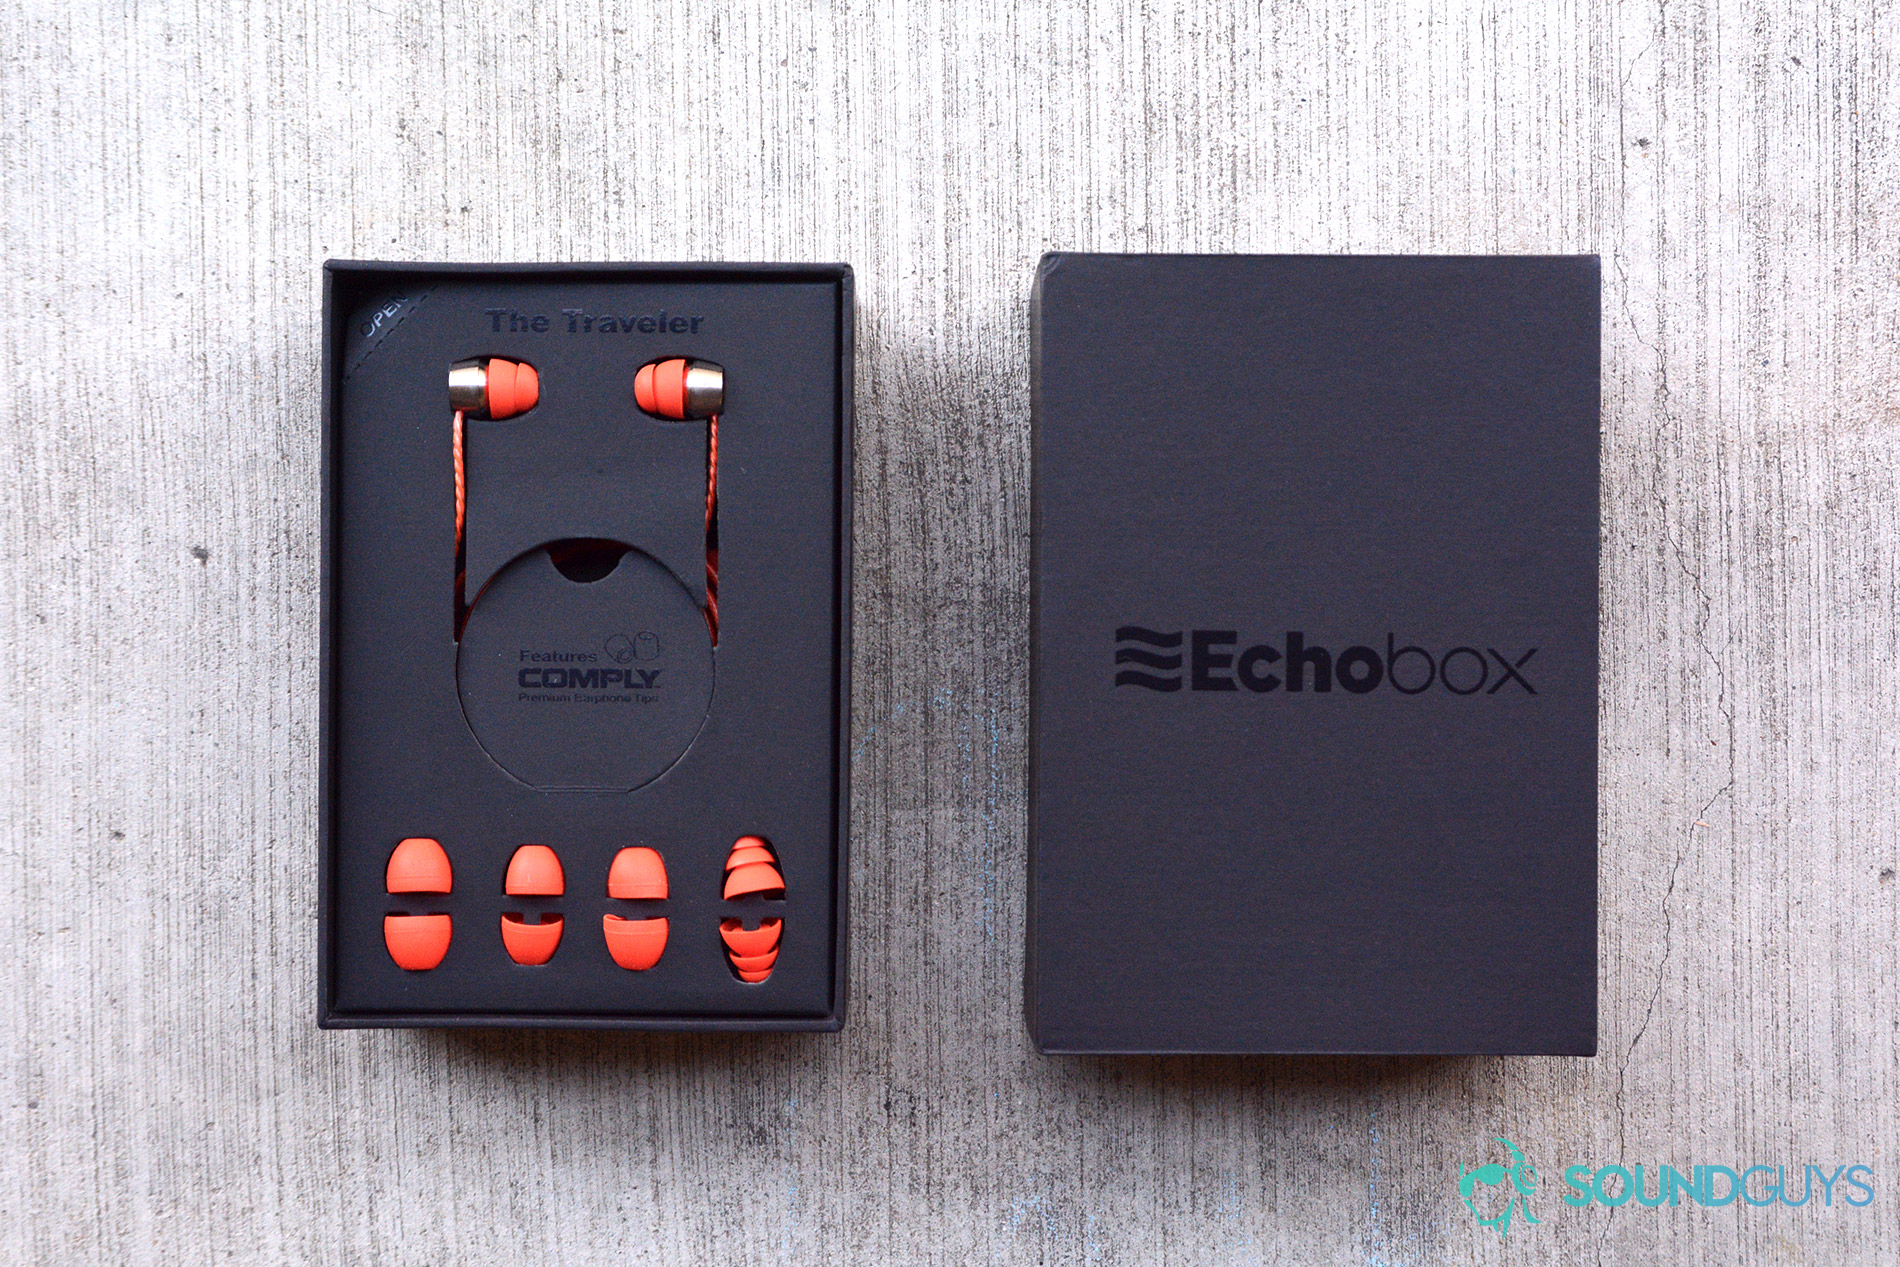 A photo of the contents of the Echobox Traveler's package.